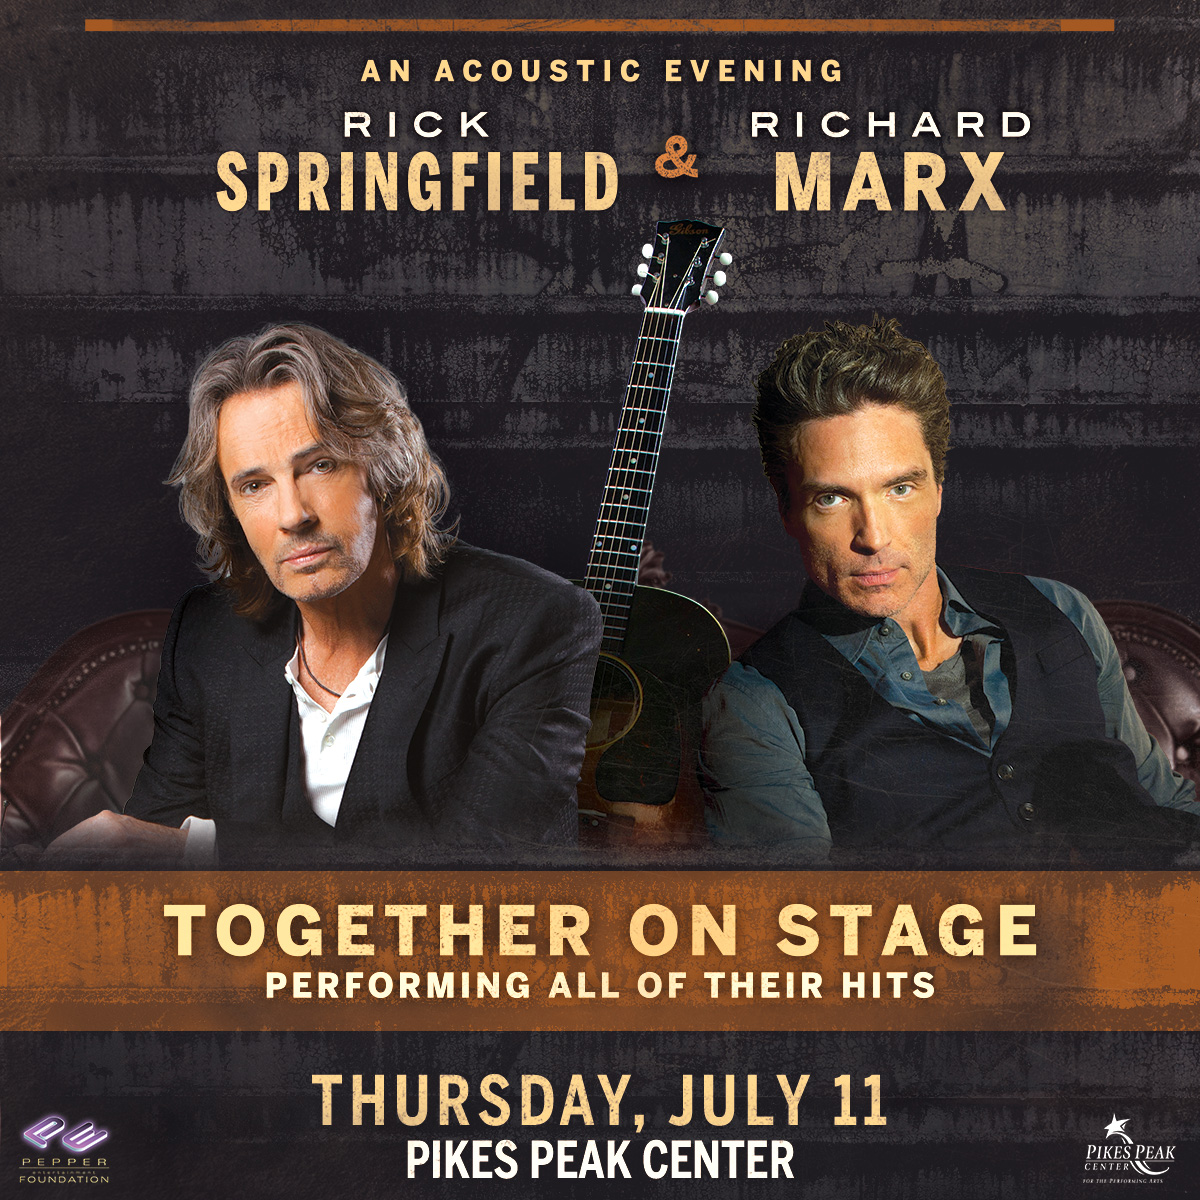 Tickets On Sale! Purchase here: bit.ly/3xfvwDu #PepperPresents An Acoustic Evening with @rickspringfield & @richardmarx Together On Stage, Thursday, July 11th at Pikes Peak Center